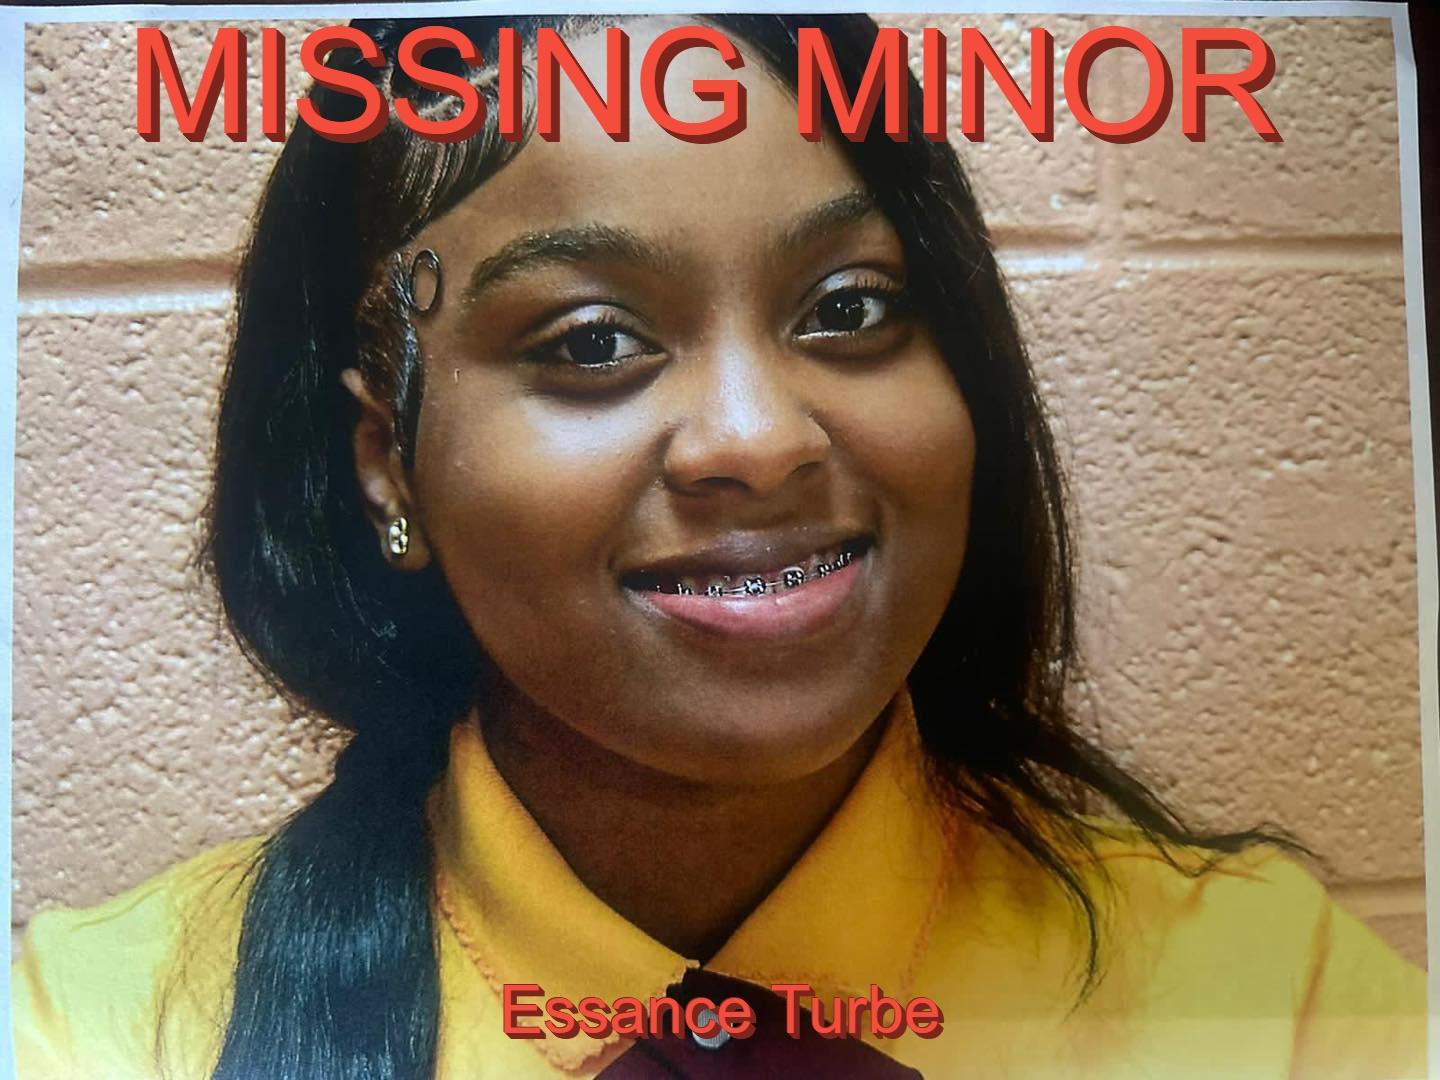 Help Police Find Missing Minor Essance Turbe